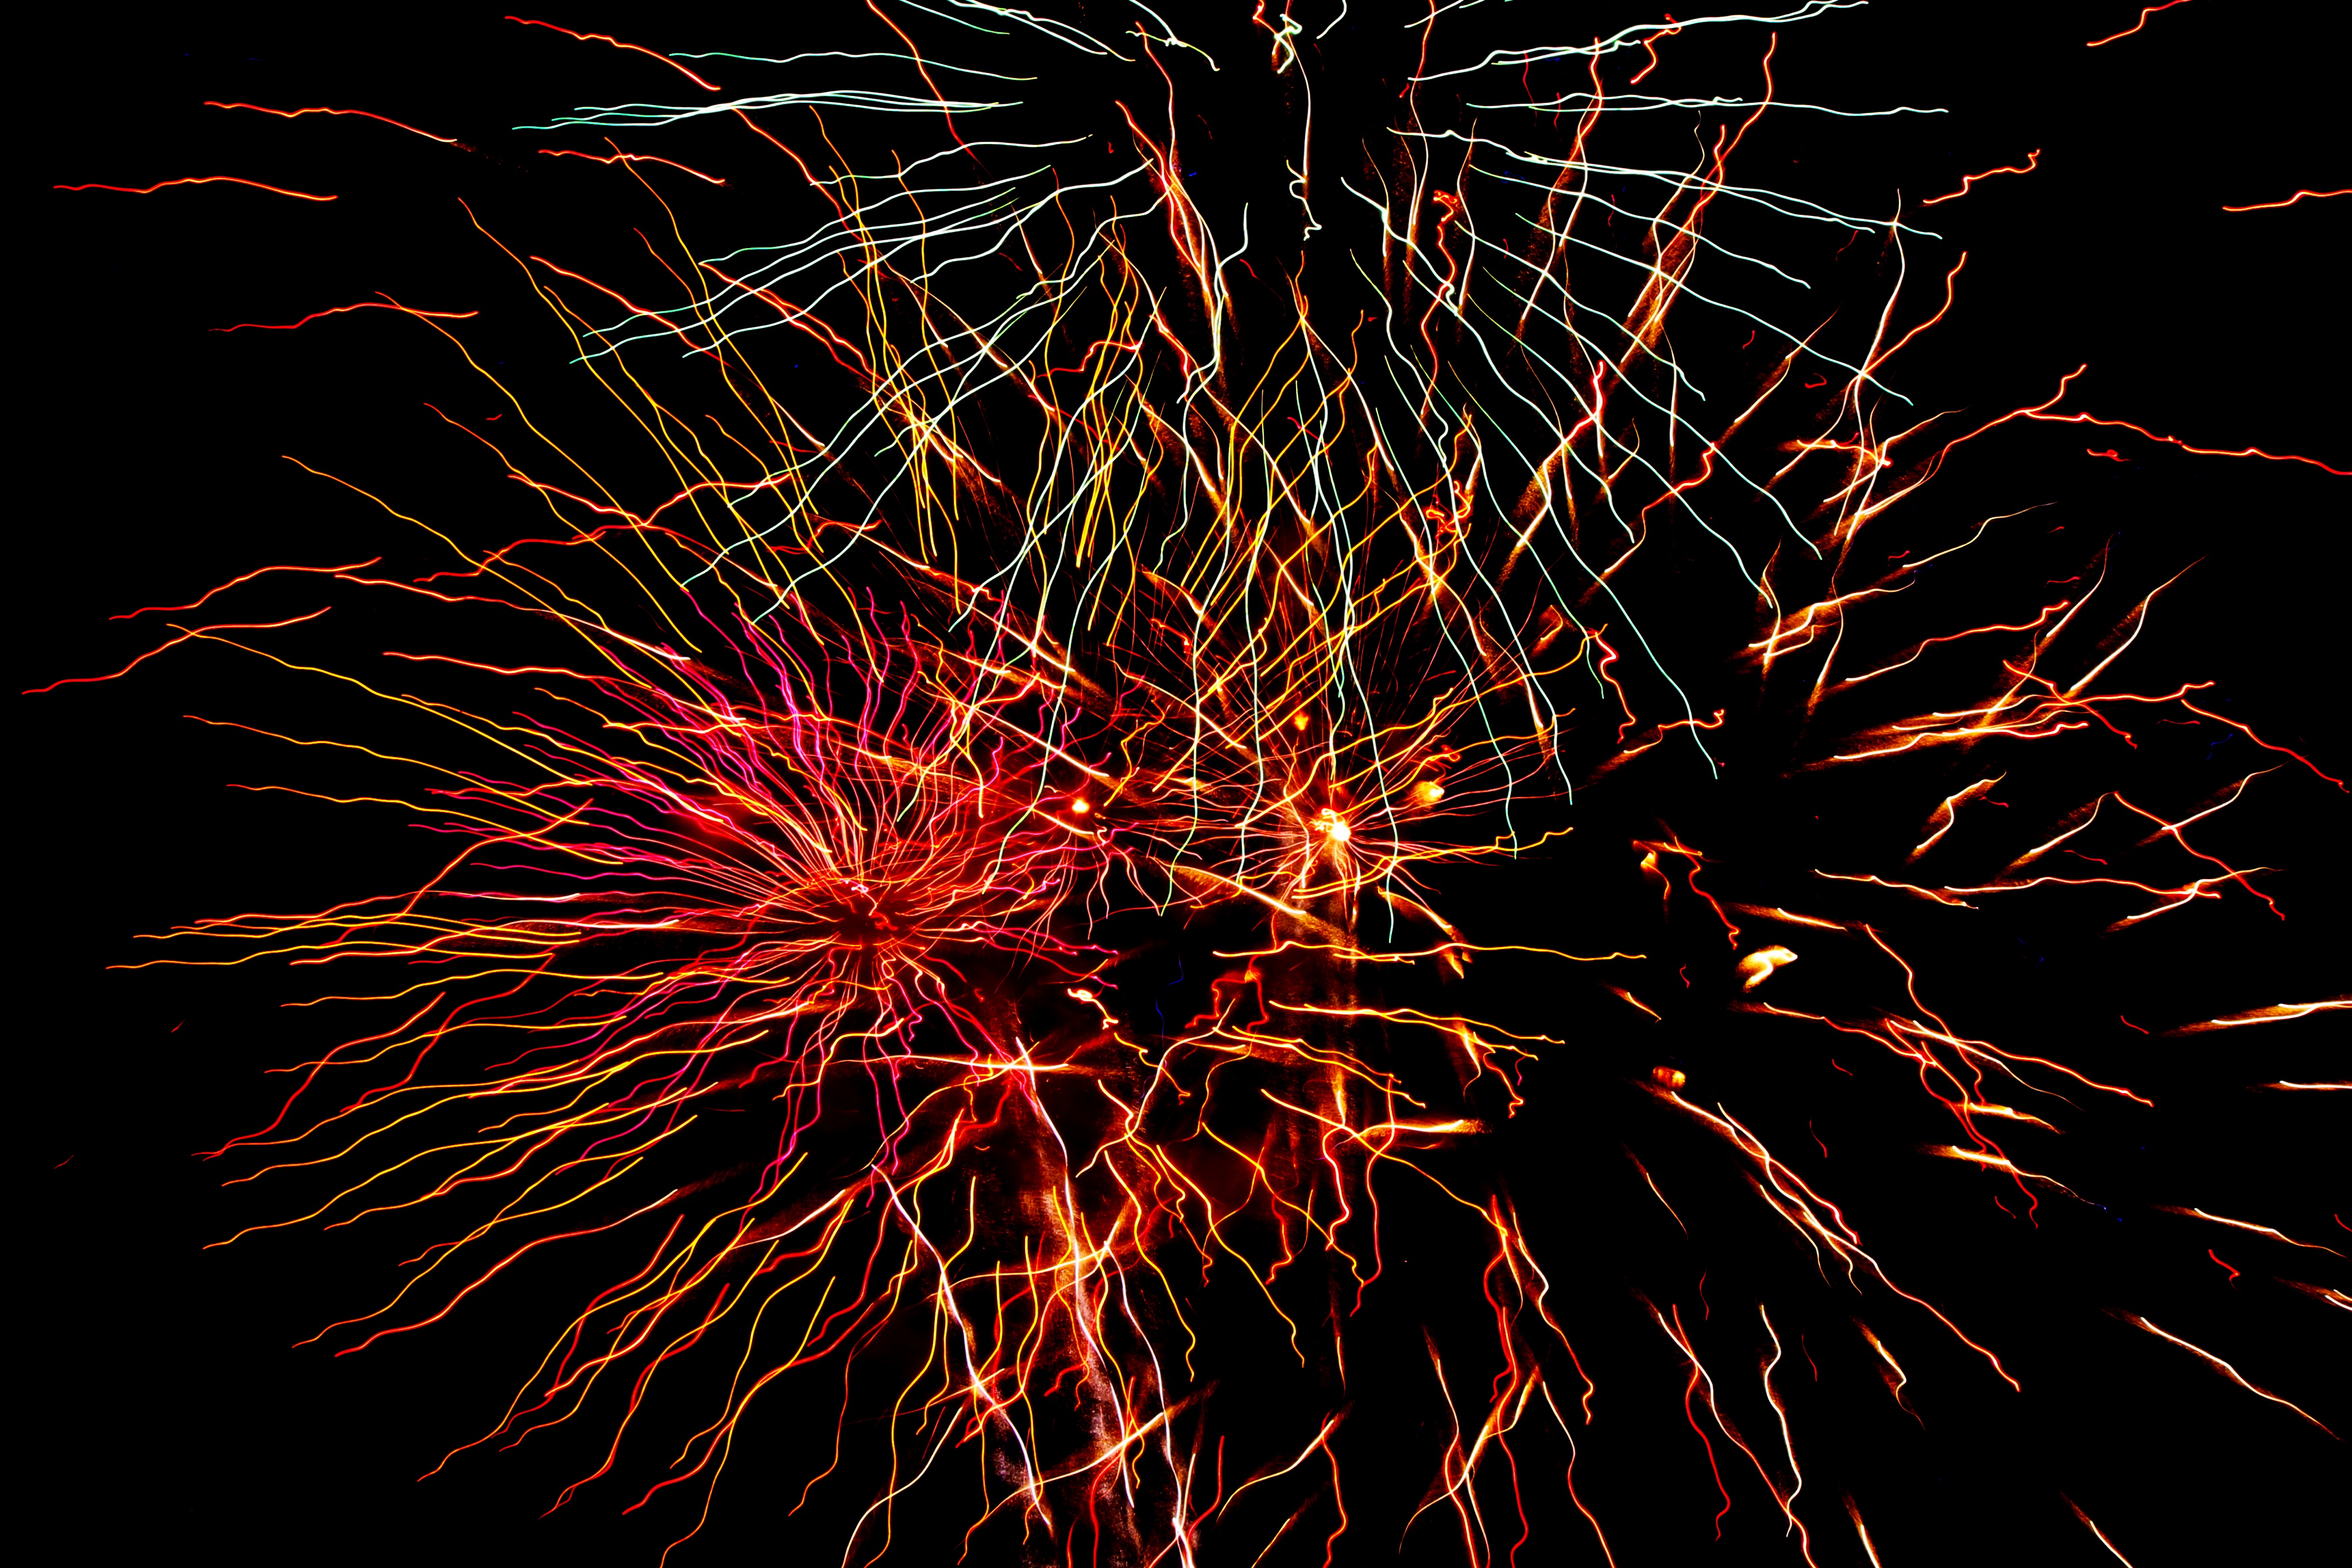 salute, holiday, holidays, fireworks collection of HD images